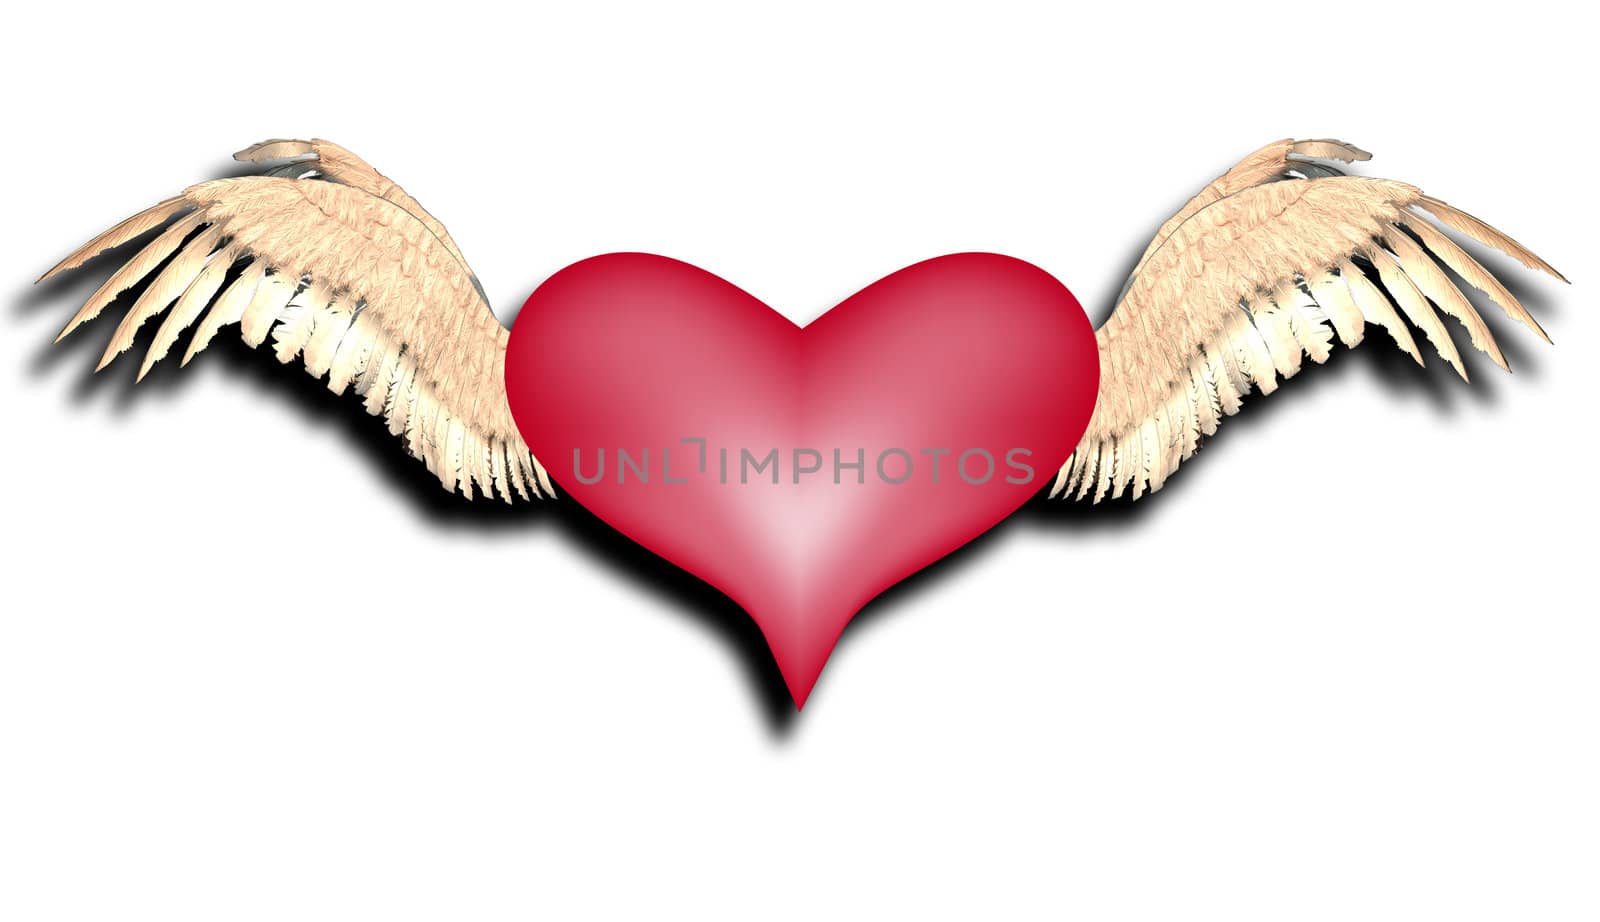 A flying heart for love and Valentines Day concepts.